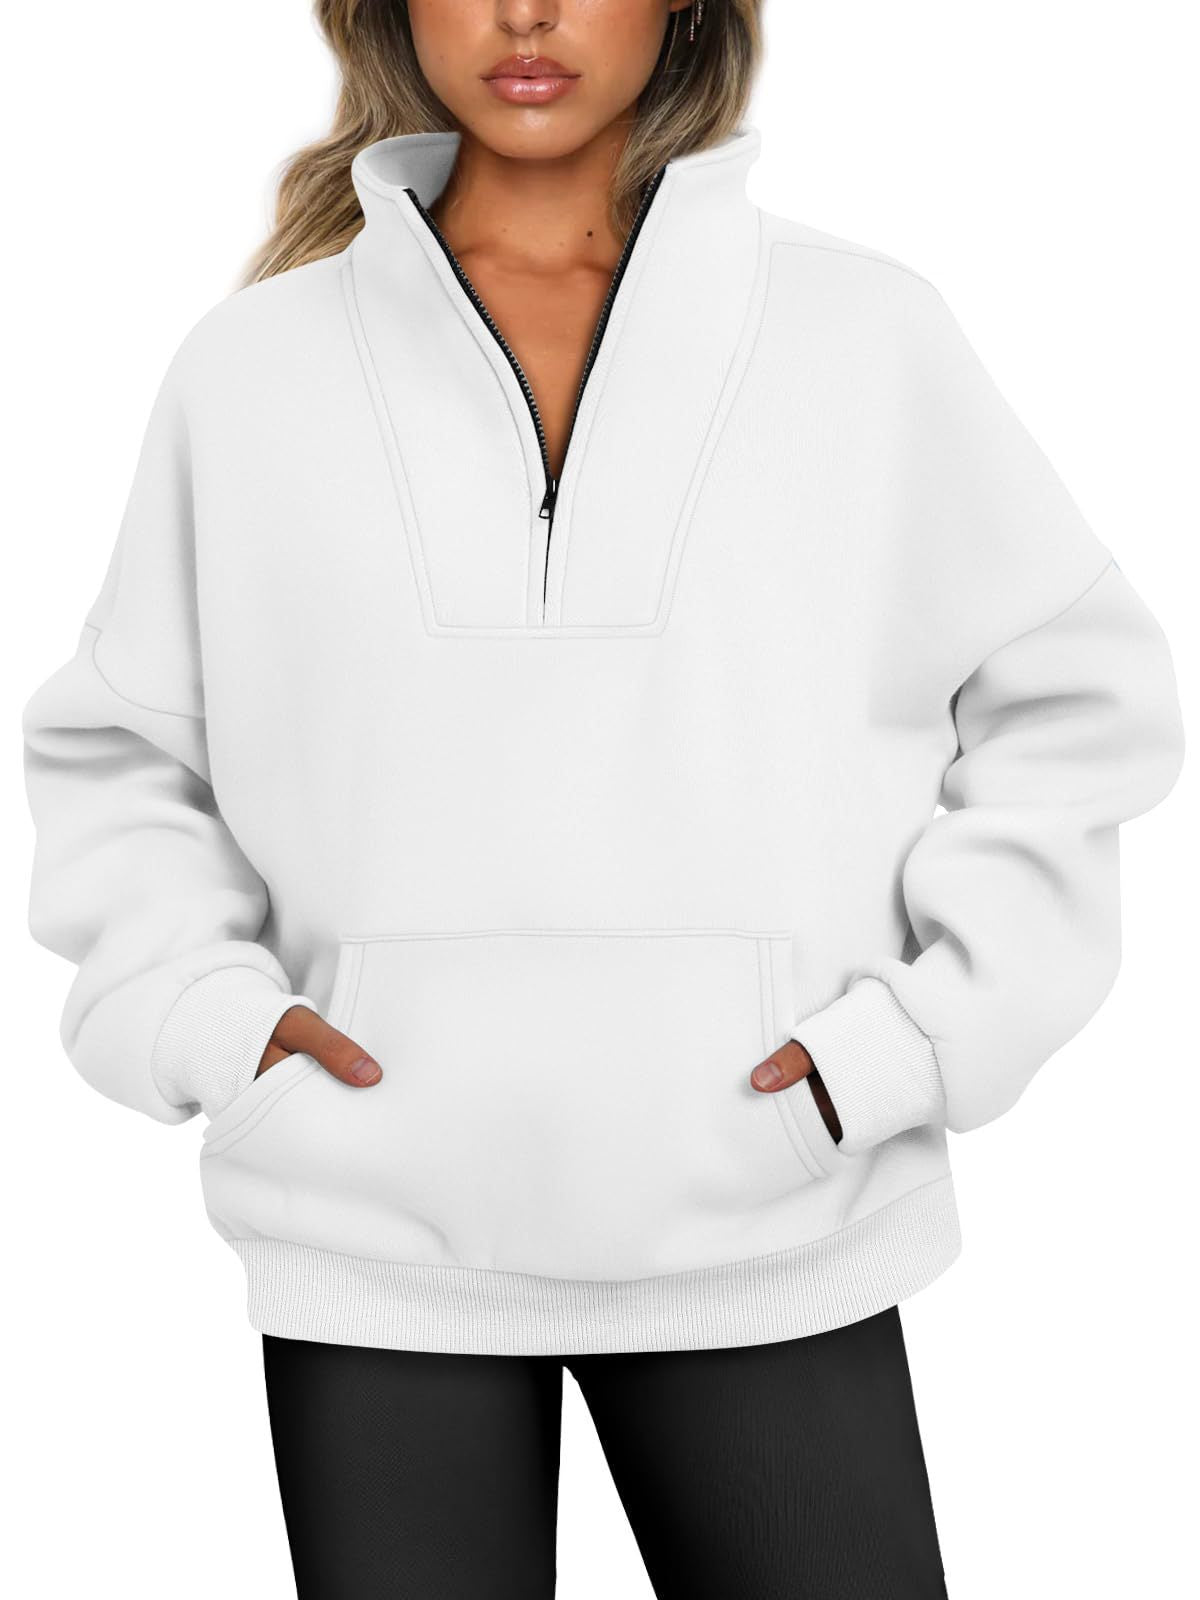 Women's Stand Collar Solid Color Hoodie Pocket Zipper Casual Sweaters